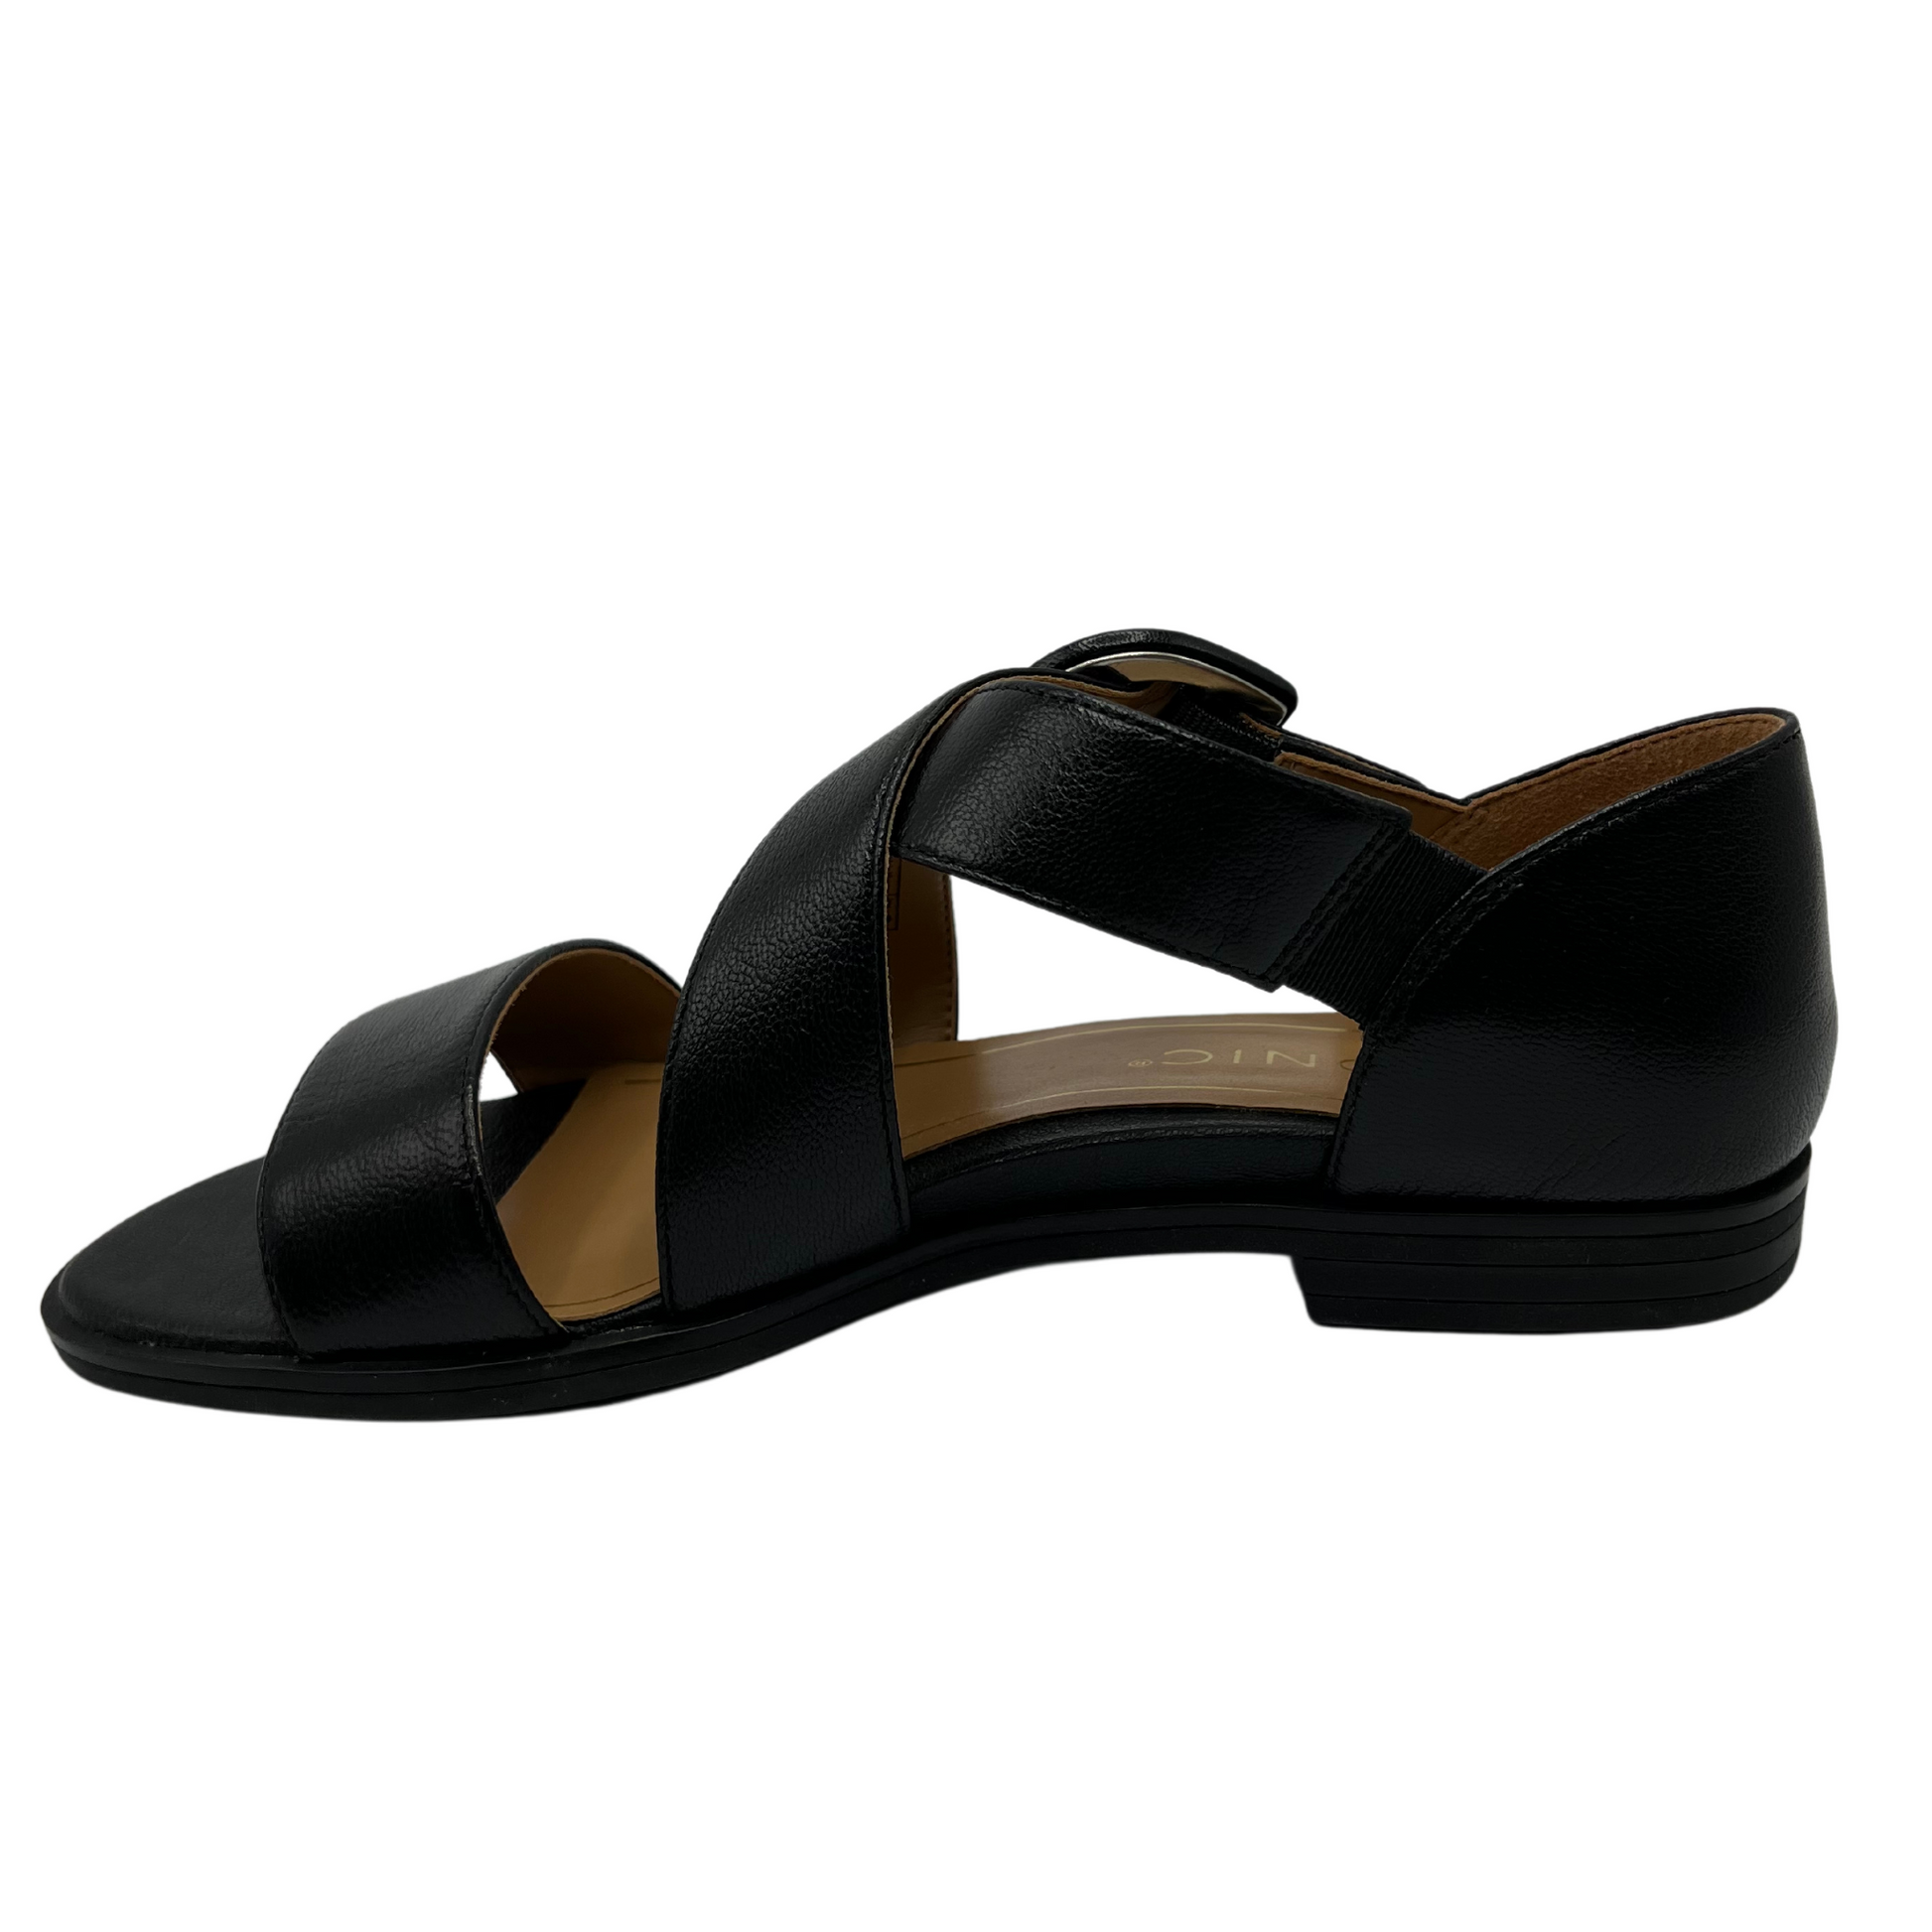 Left facing view of black leather sandal with low heel and criss cross straps